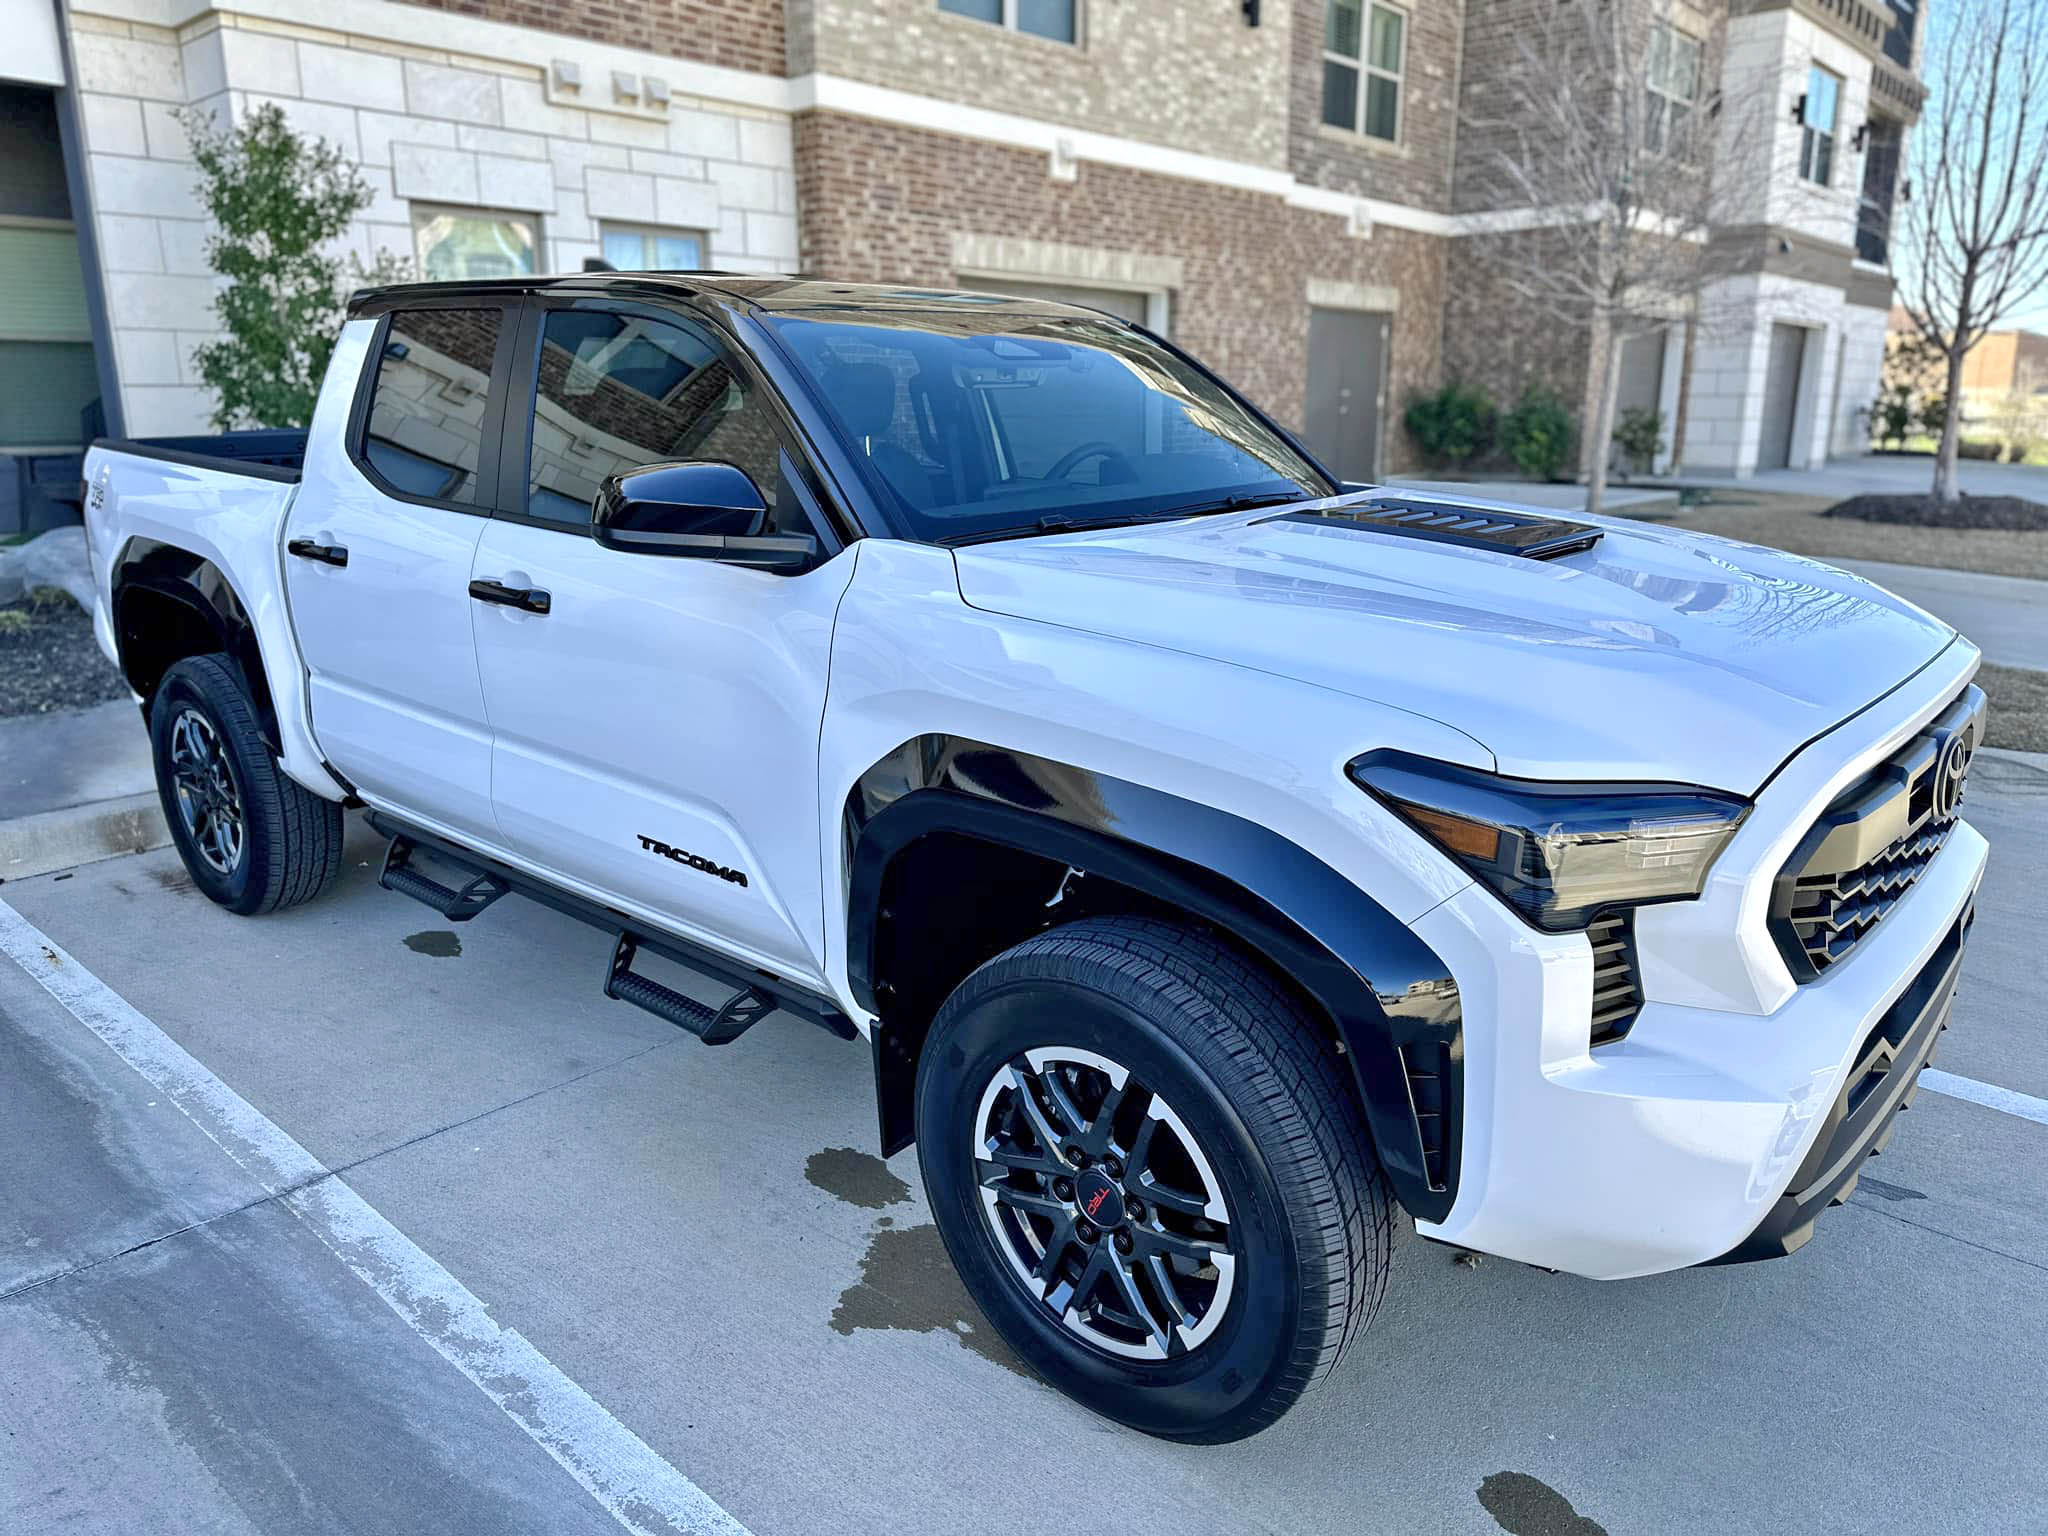 2024 Tacoma Official ICE CAP 2024 Tacoma Thread (4th Gen) Roof Wrap + Fender Flare Wrapped in Black for a 2024 TRD PRO look 1